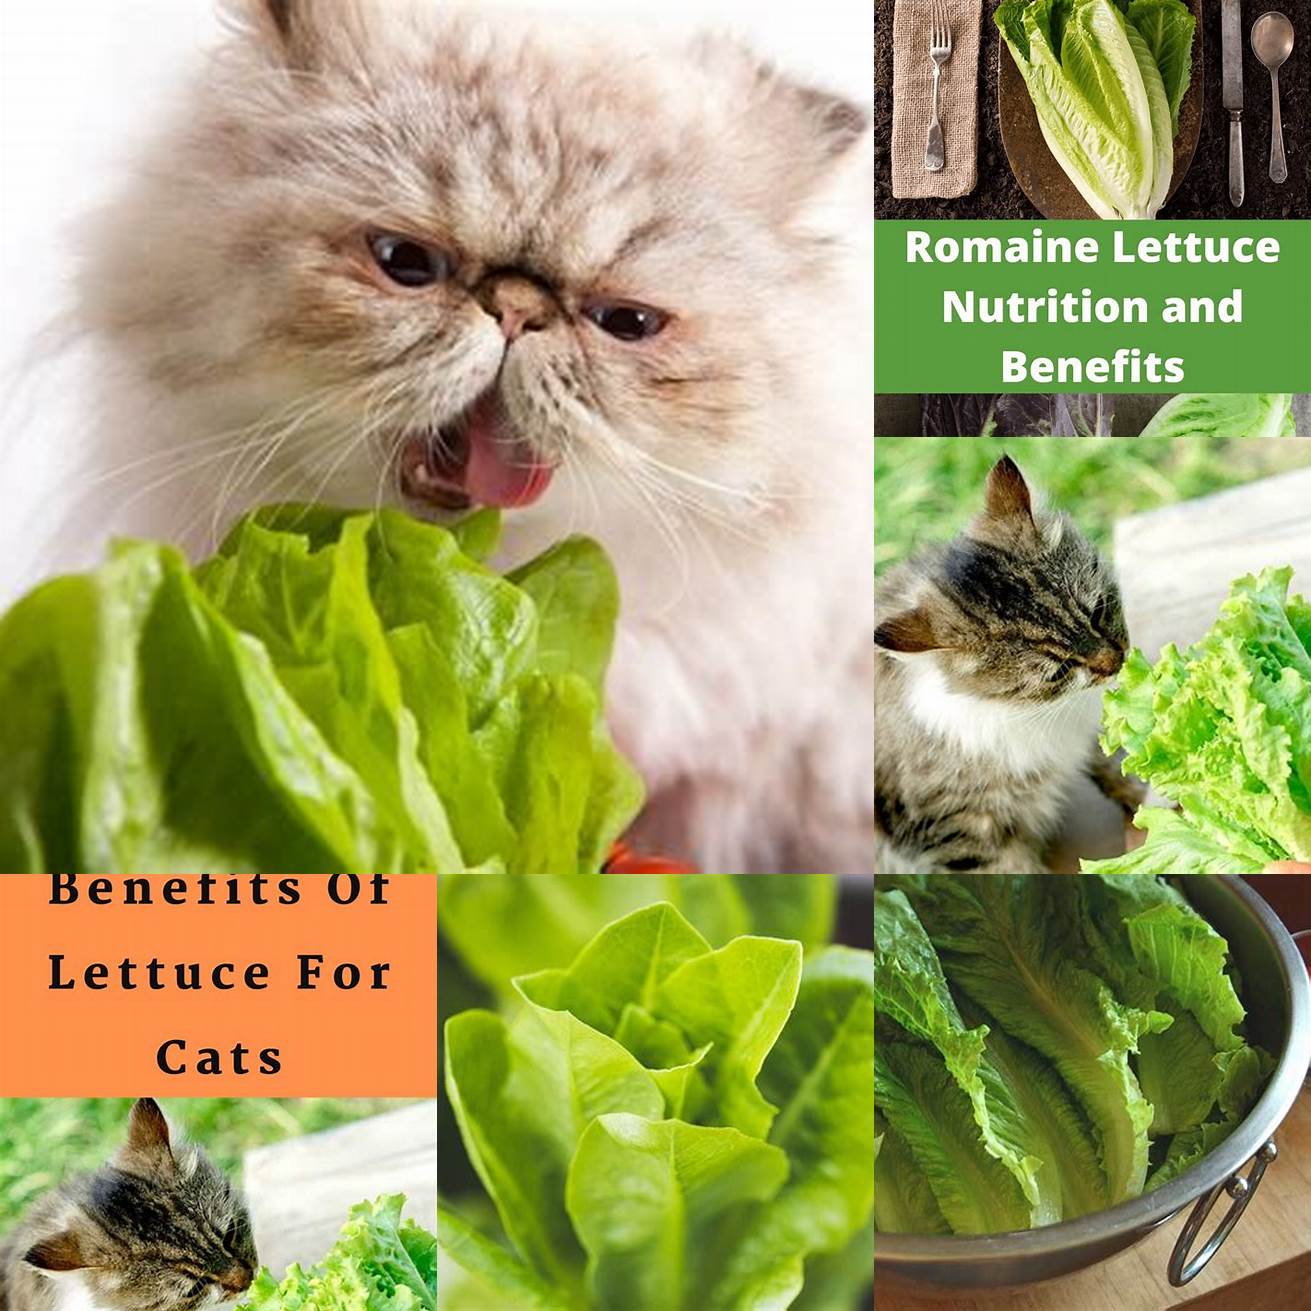 Is romaine lettuce nutritious for cats